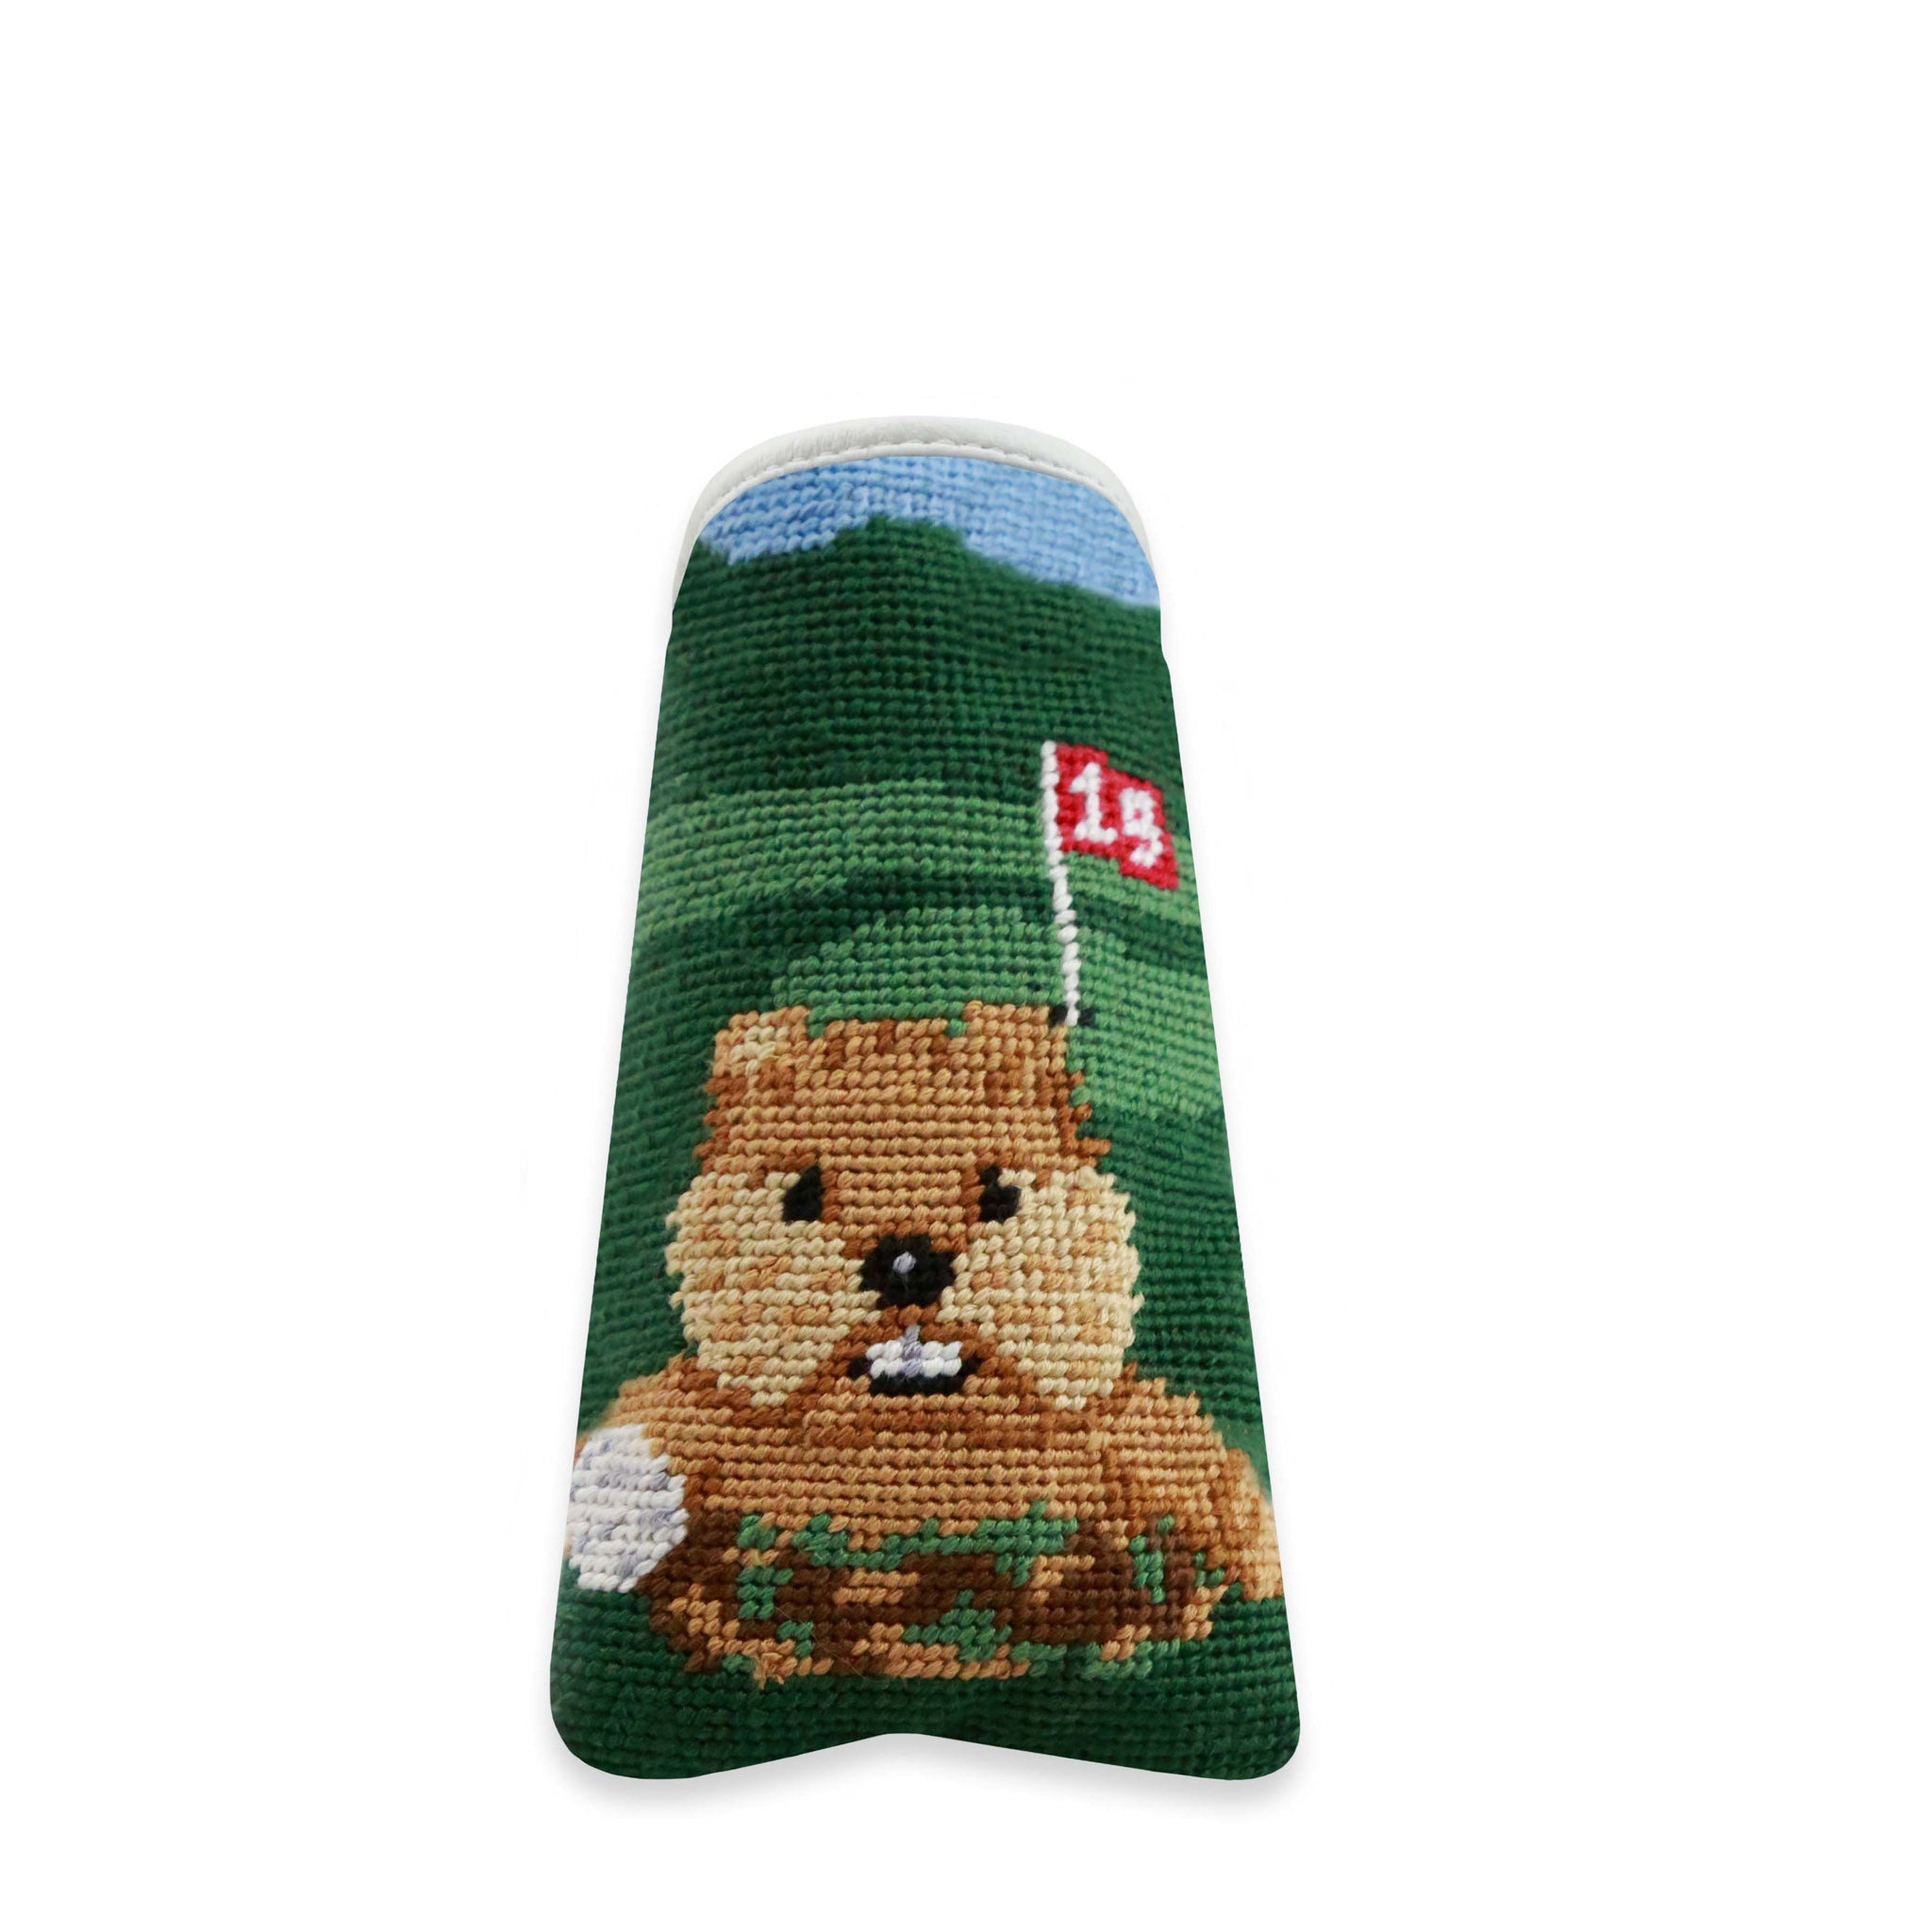 Smathers and Branson Gopher Golf Multi  Needlepoint Putter Headcover   